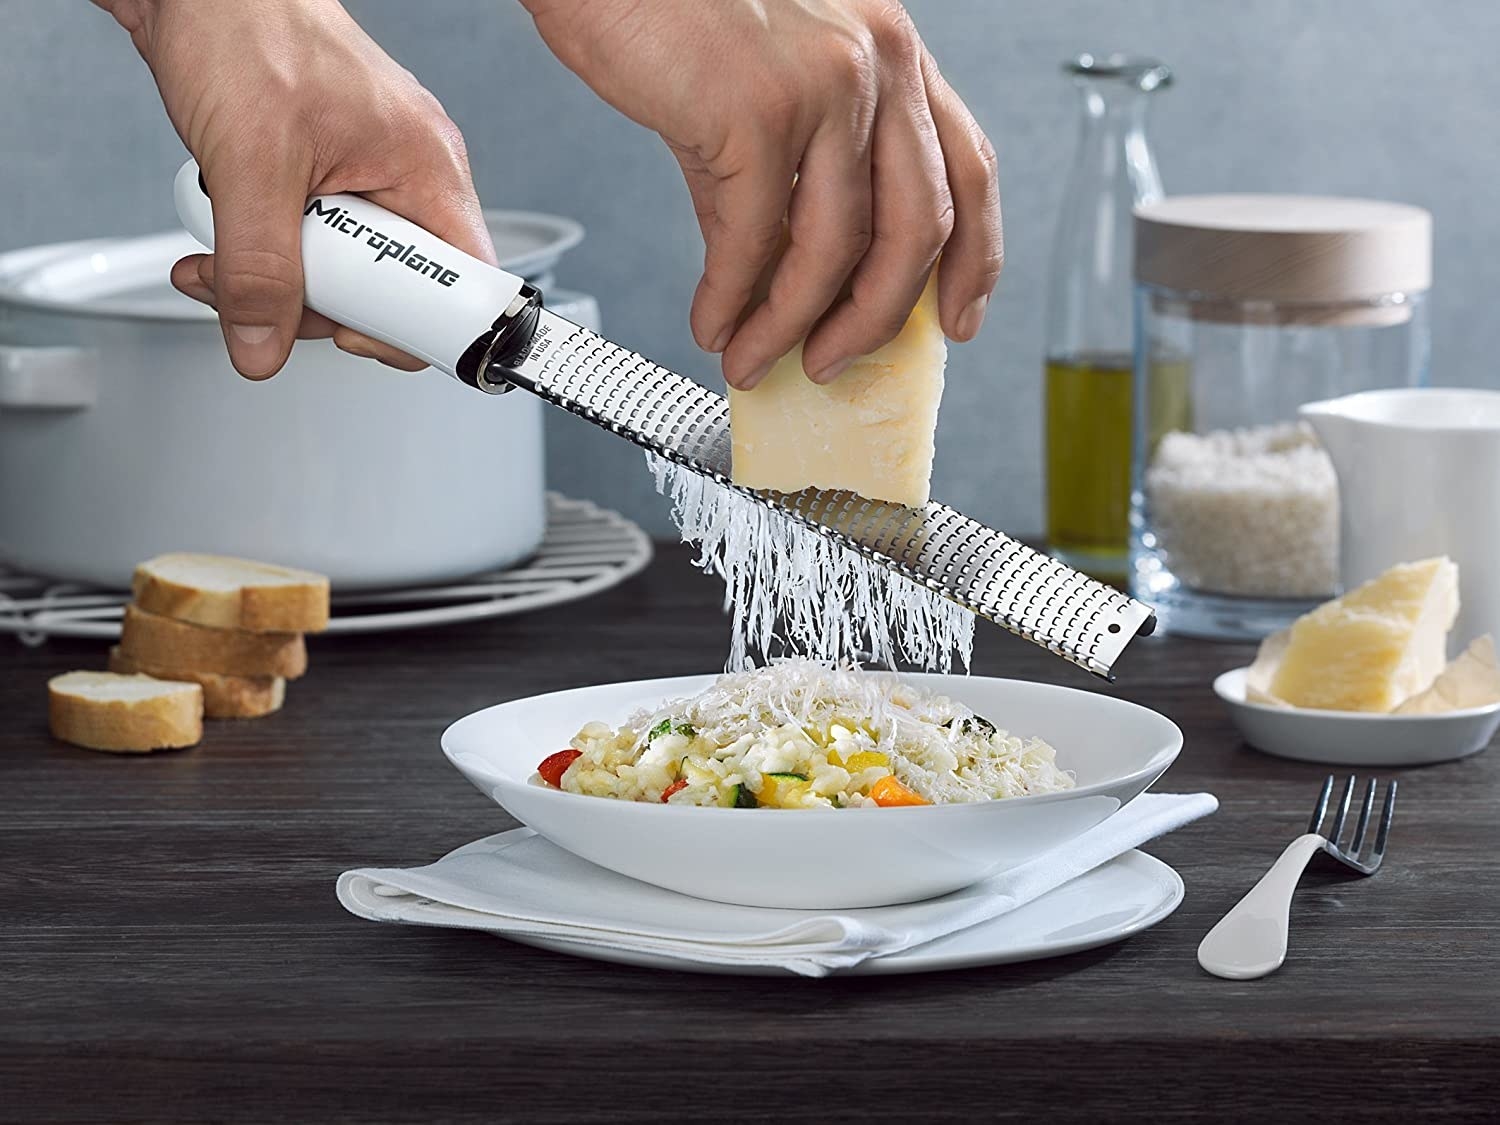 Hand using the microplane to grate a block of cheese on pasta